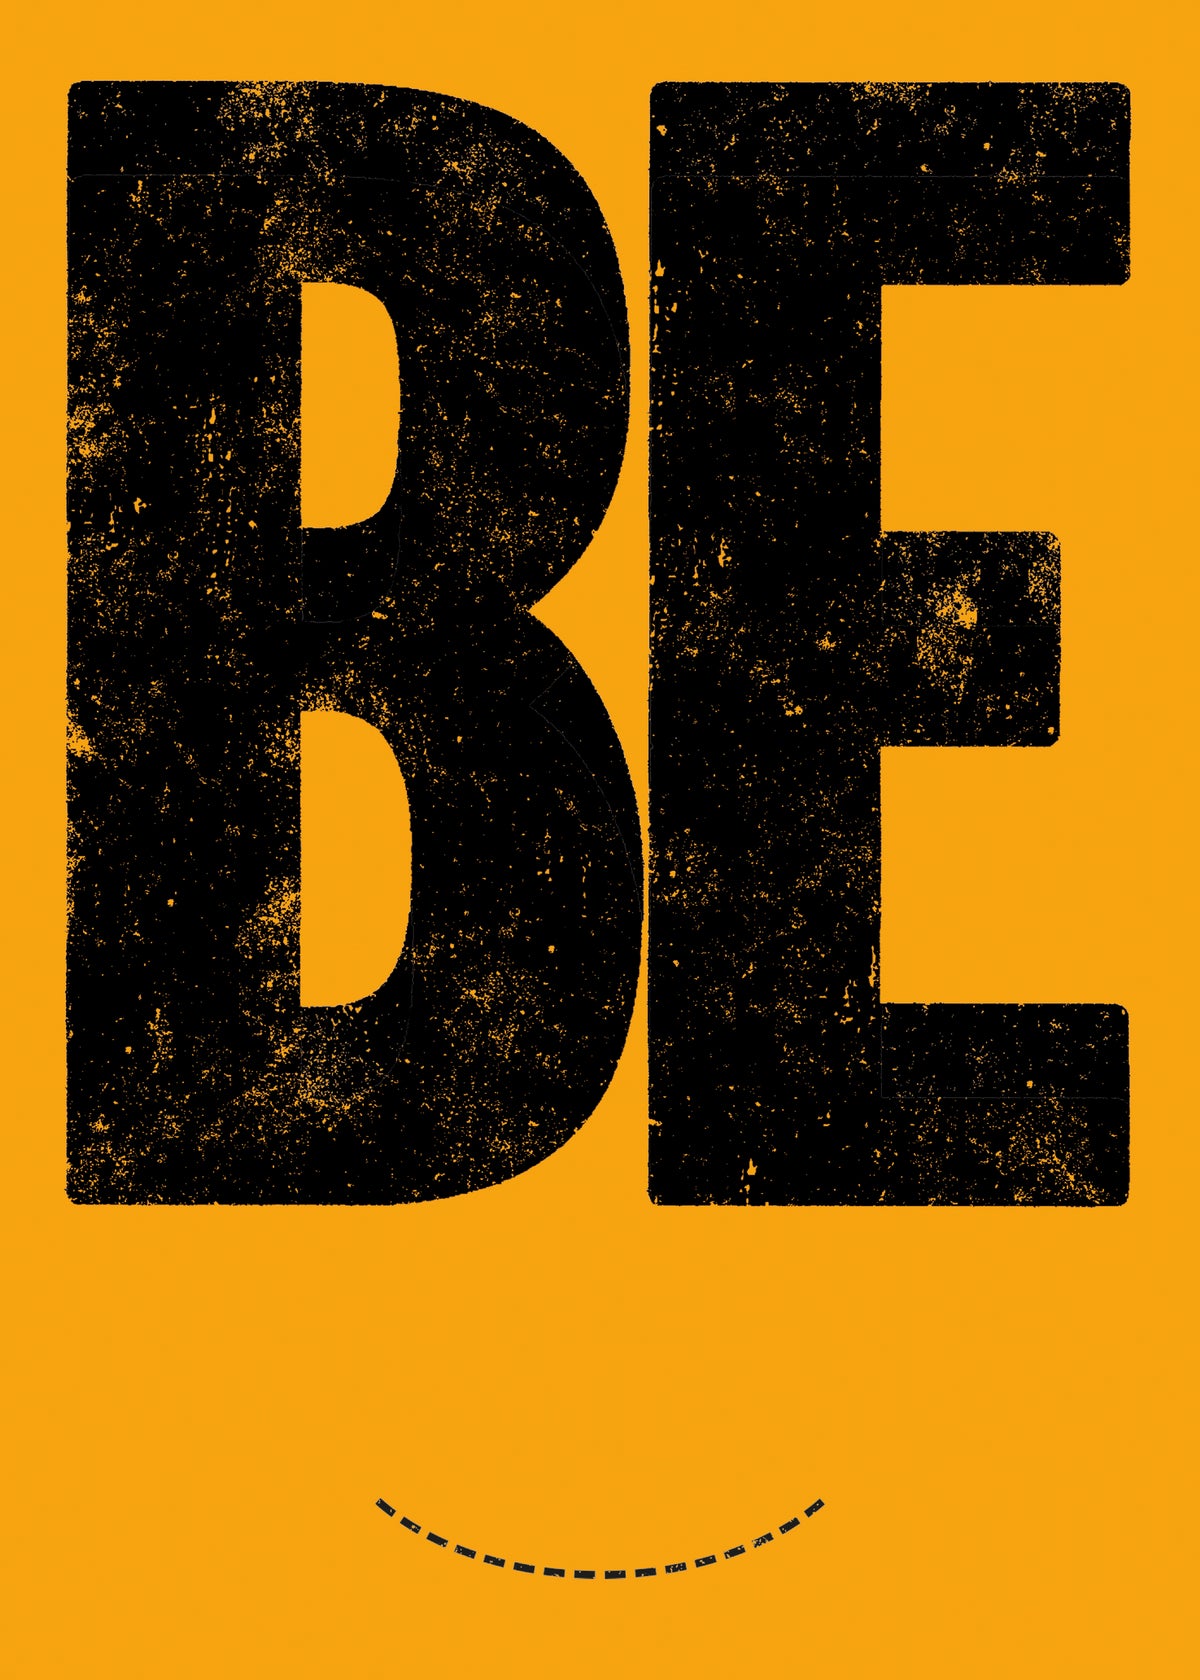 BE by Beanwave Editions